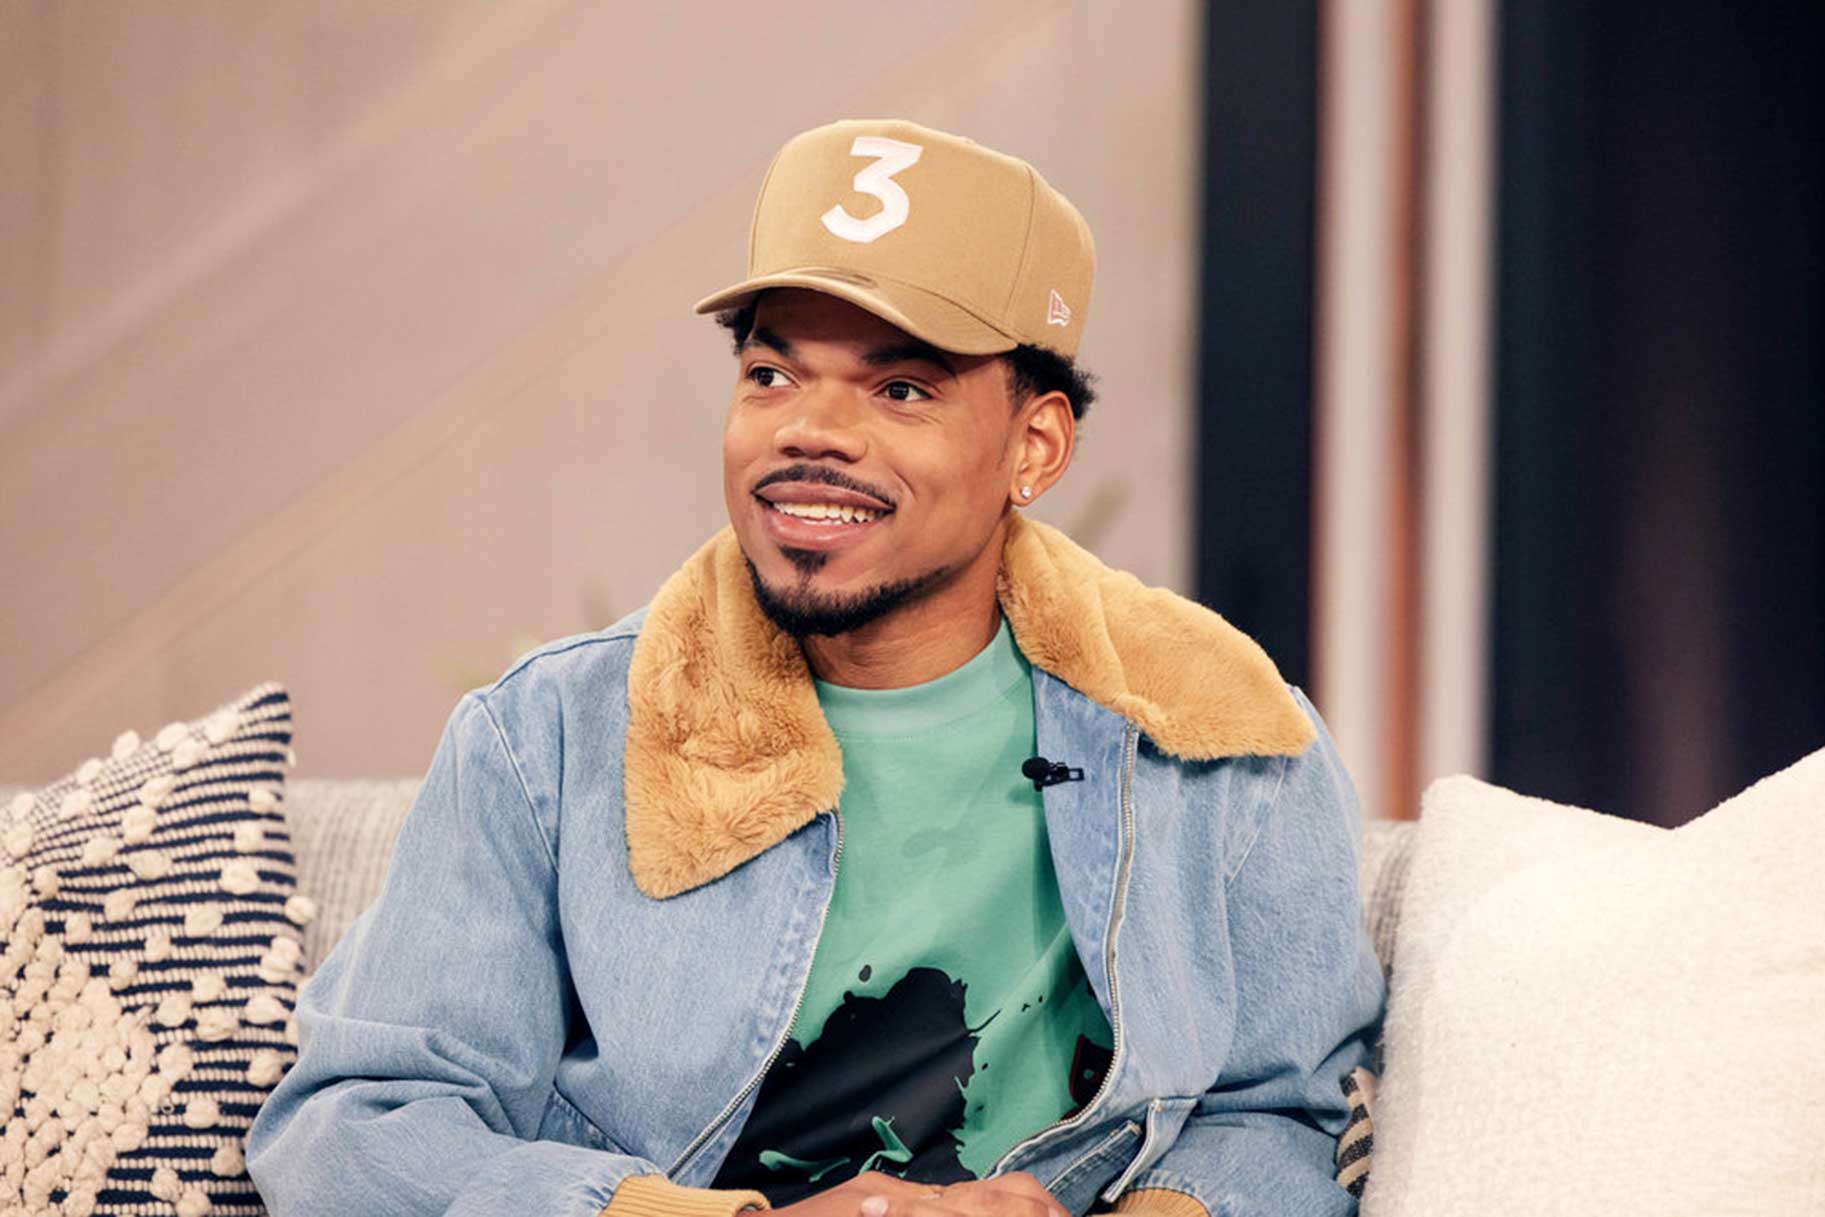 Chance the Rapper on The Kelly Clarkson Show.